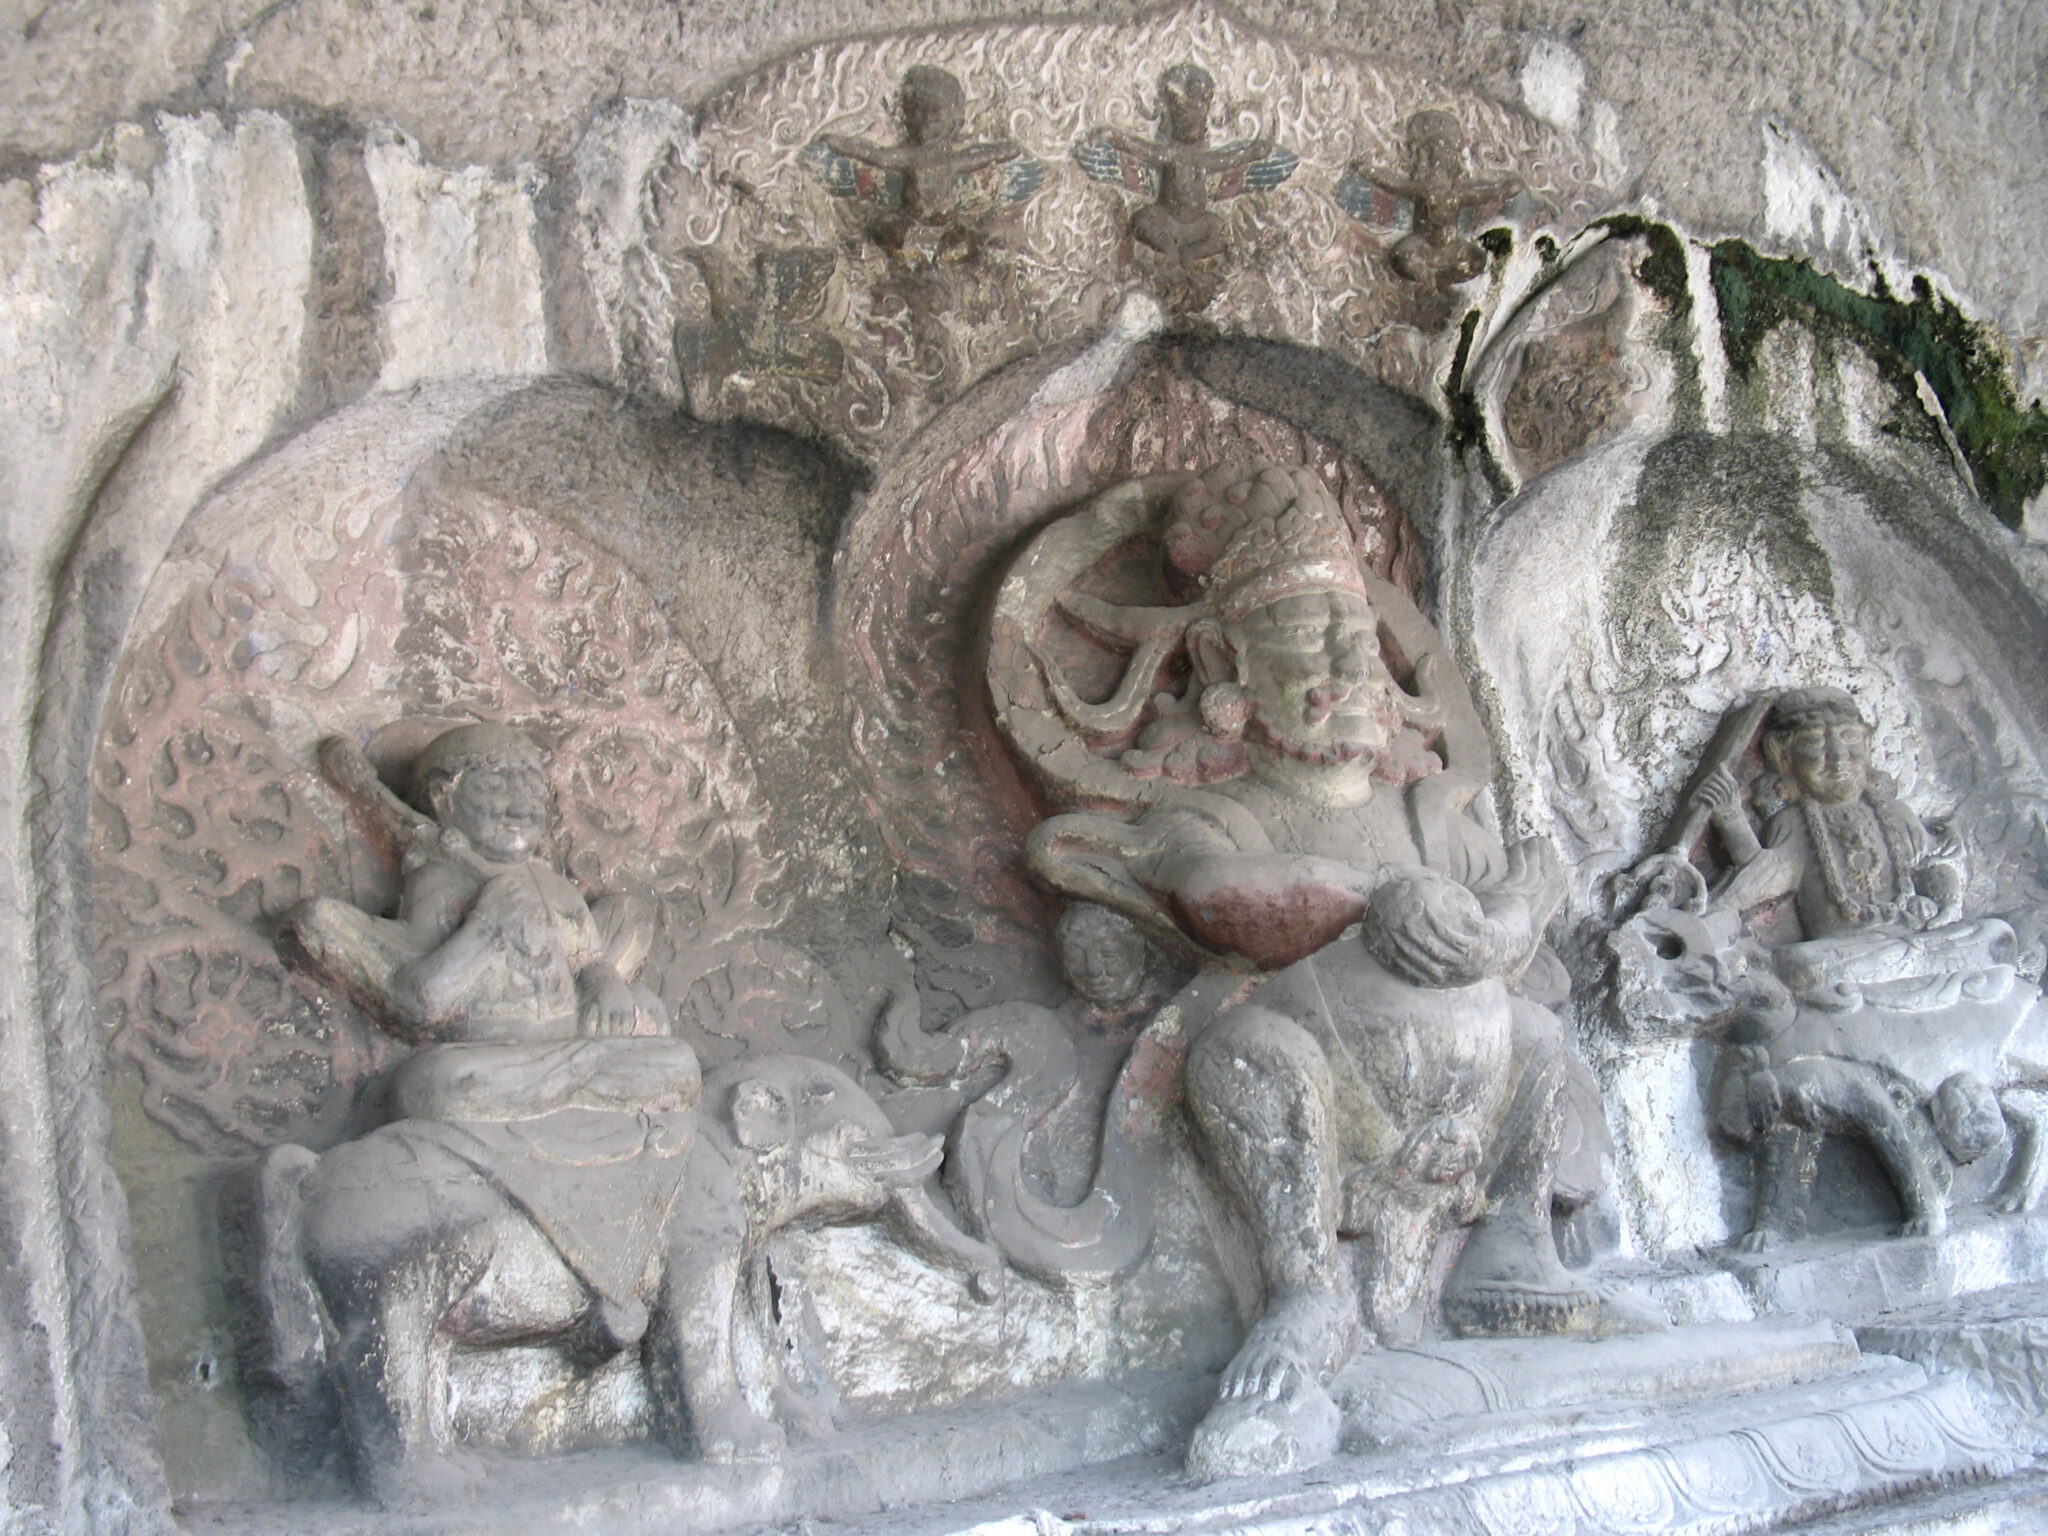 Relief sculpture in gray stone with faded polychrome featuring central deity flanked by two figures riding elephants